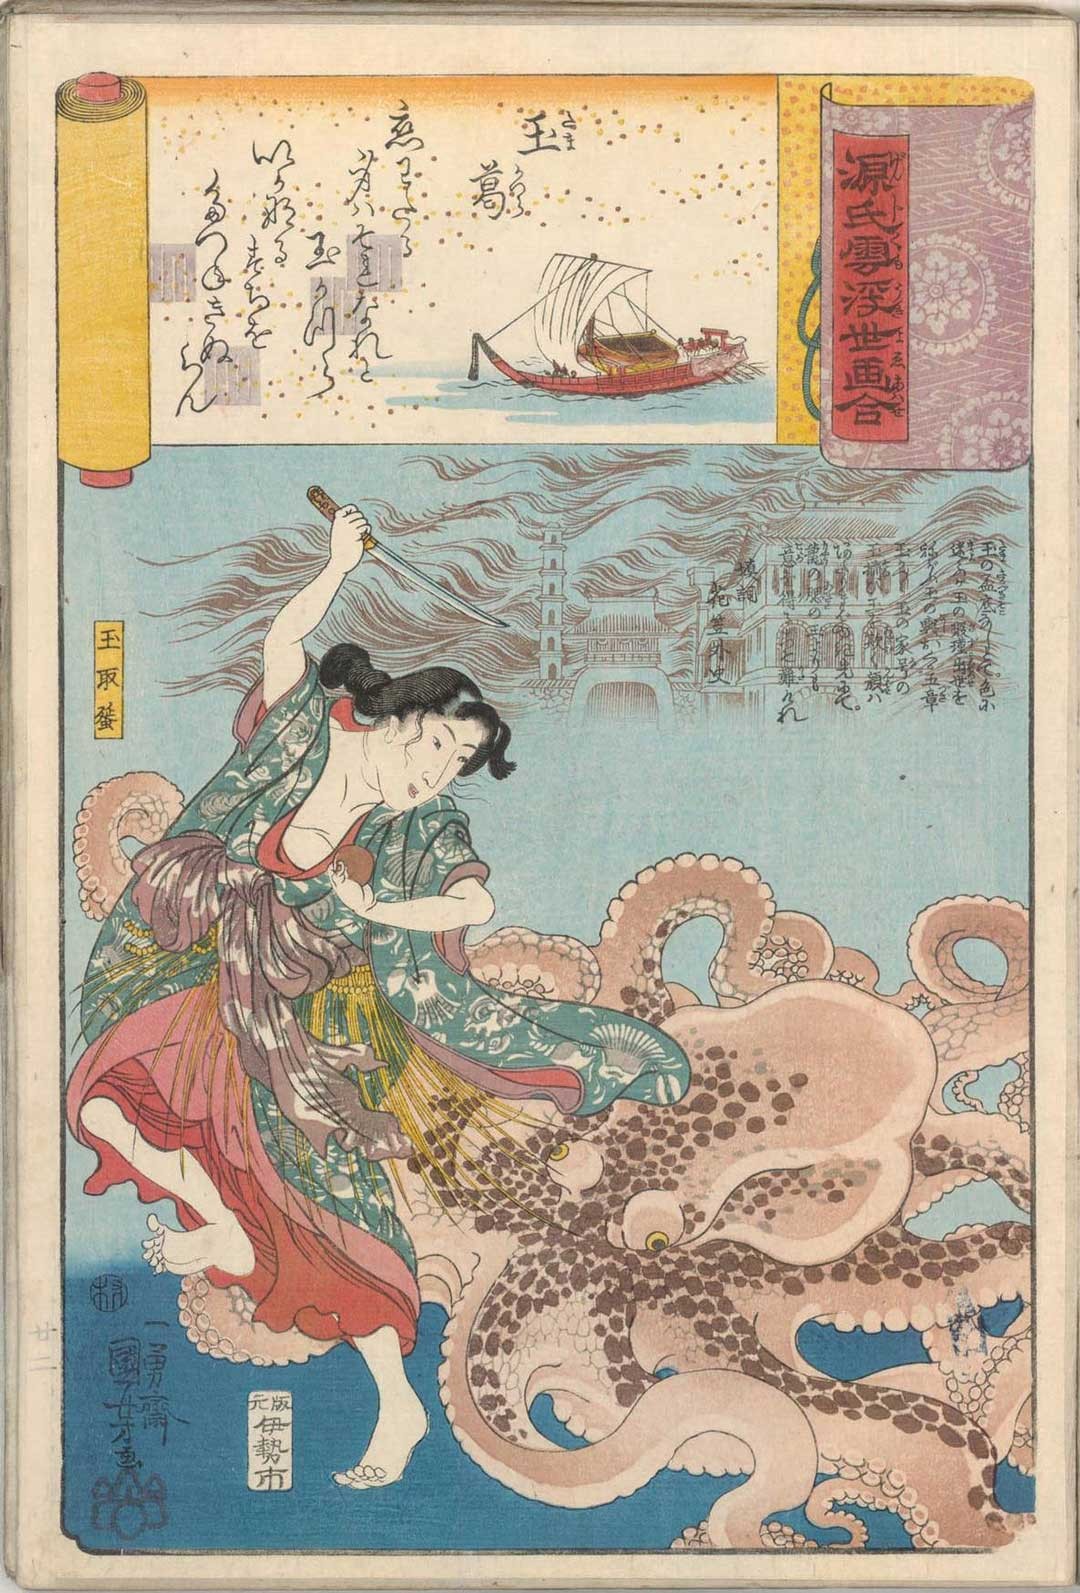 <BODY>Utagawa Kuniyoshi, “Tamakazura, the Diver Brings Back the Pearls” from the series Comparison of Scenes from the Tale of Genji and the Floating World, 1843–1847<br />© MAK/Georg Mayer</BODY>